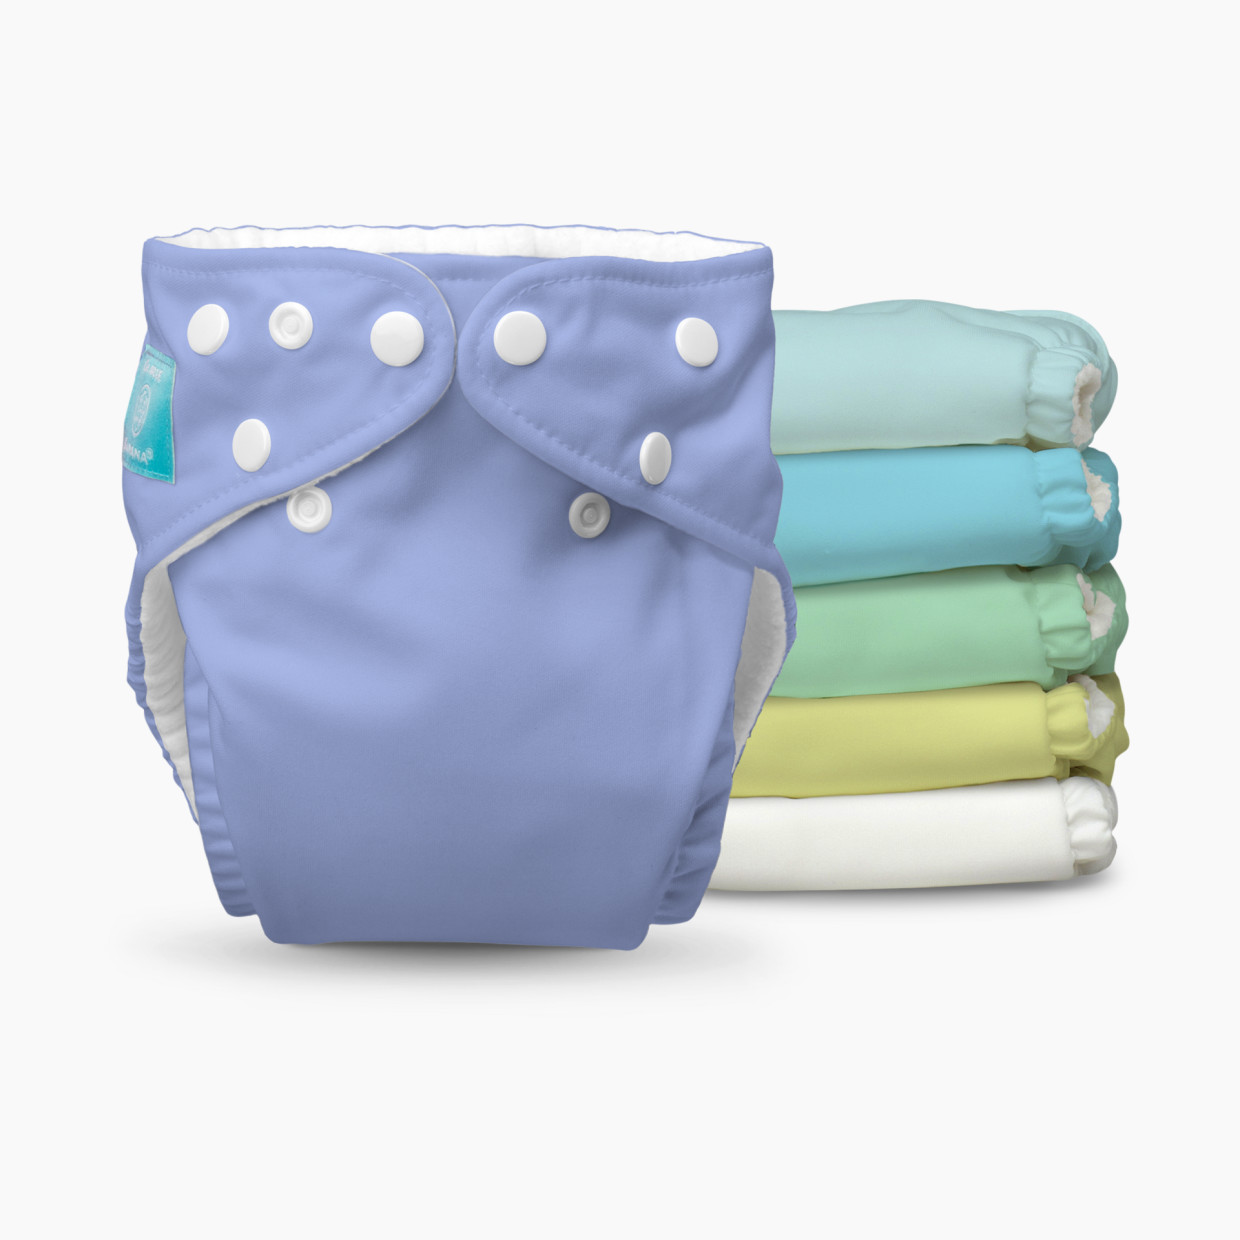 Charlie Banana One-size Reusable Cloth Diapers with 12 Reusable Inserts (6 Pack) - Unisex Pastel.